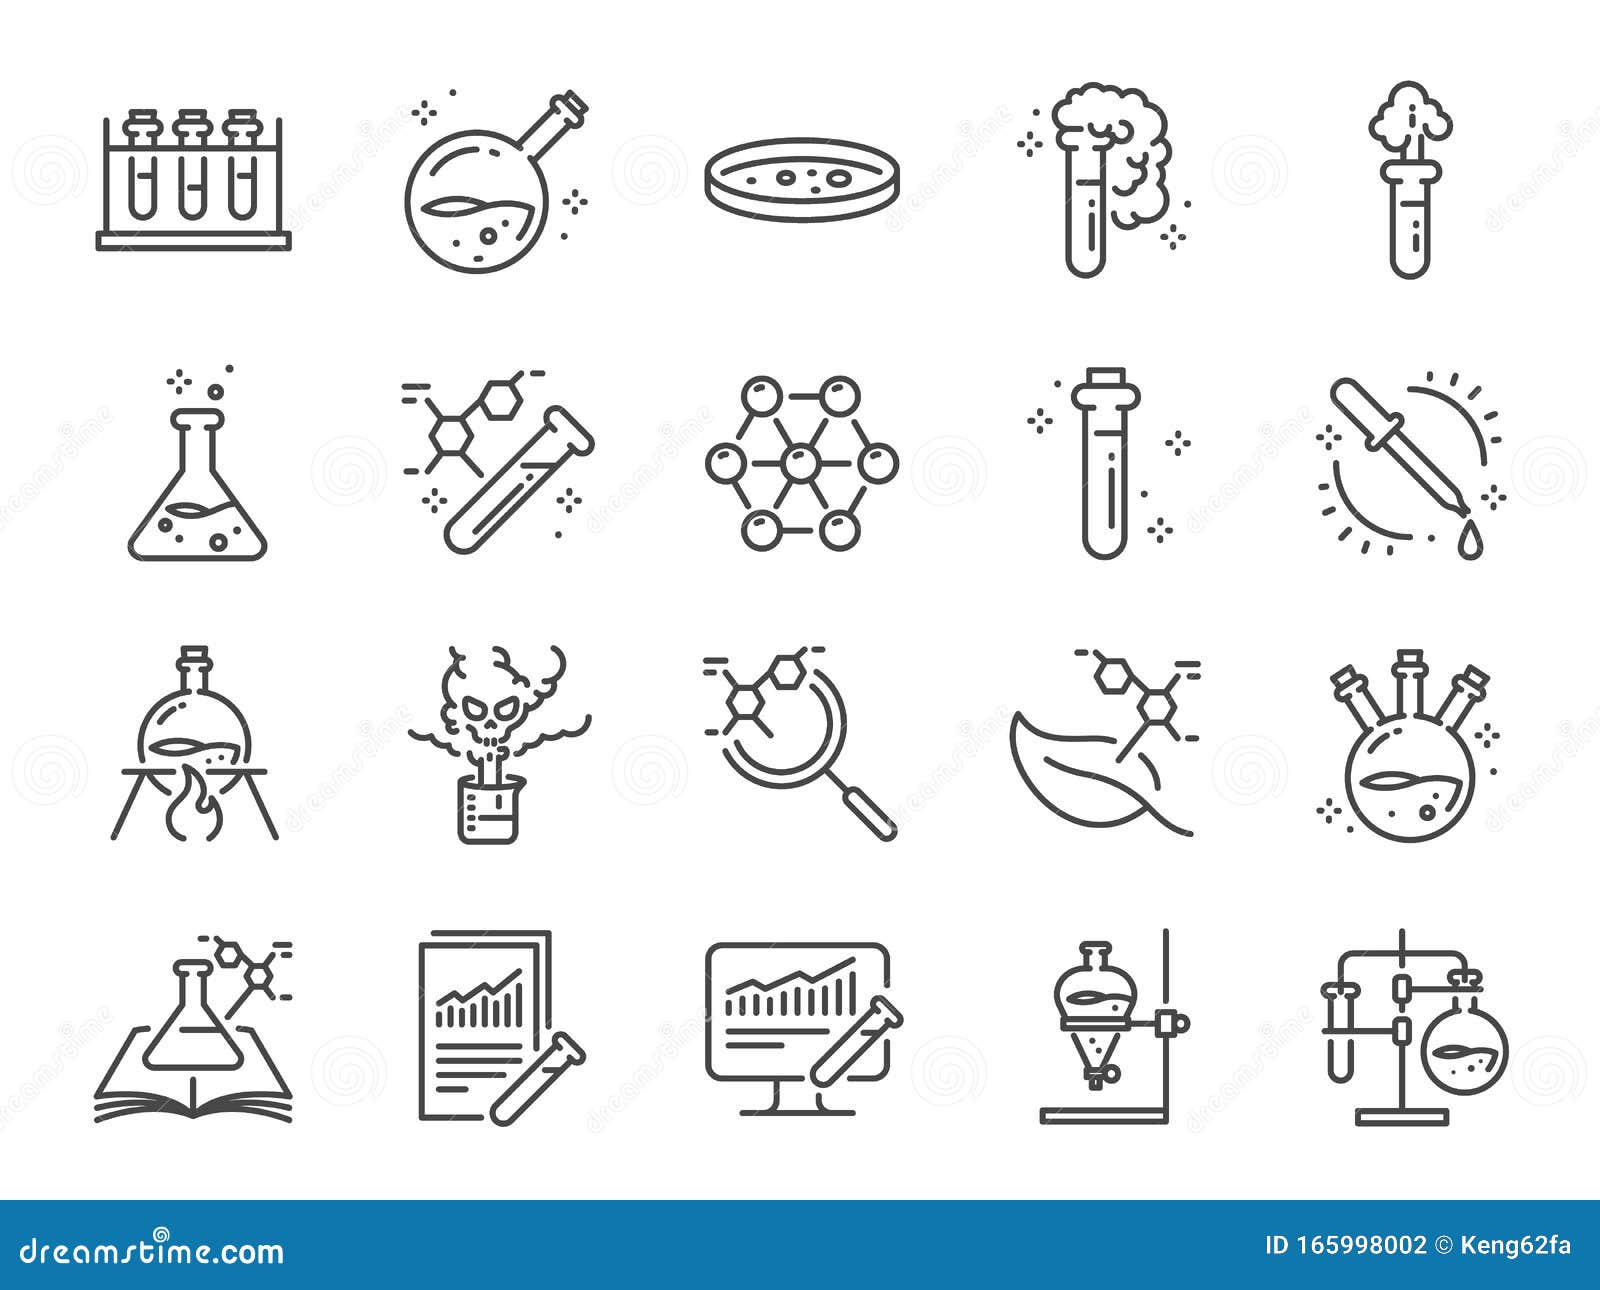 chemistry lab icon set. included icons as chemical, formula, medical analysis, laboratory test flask, experiment and more.